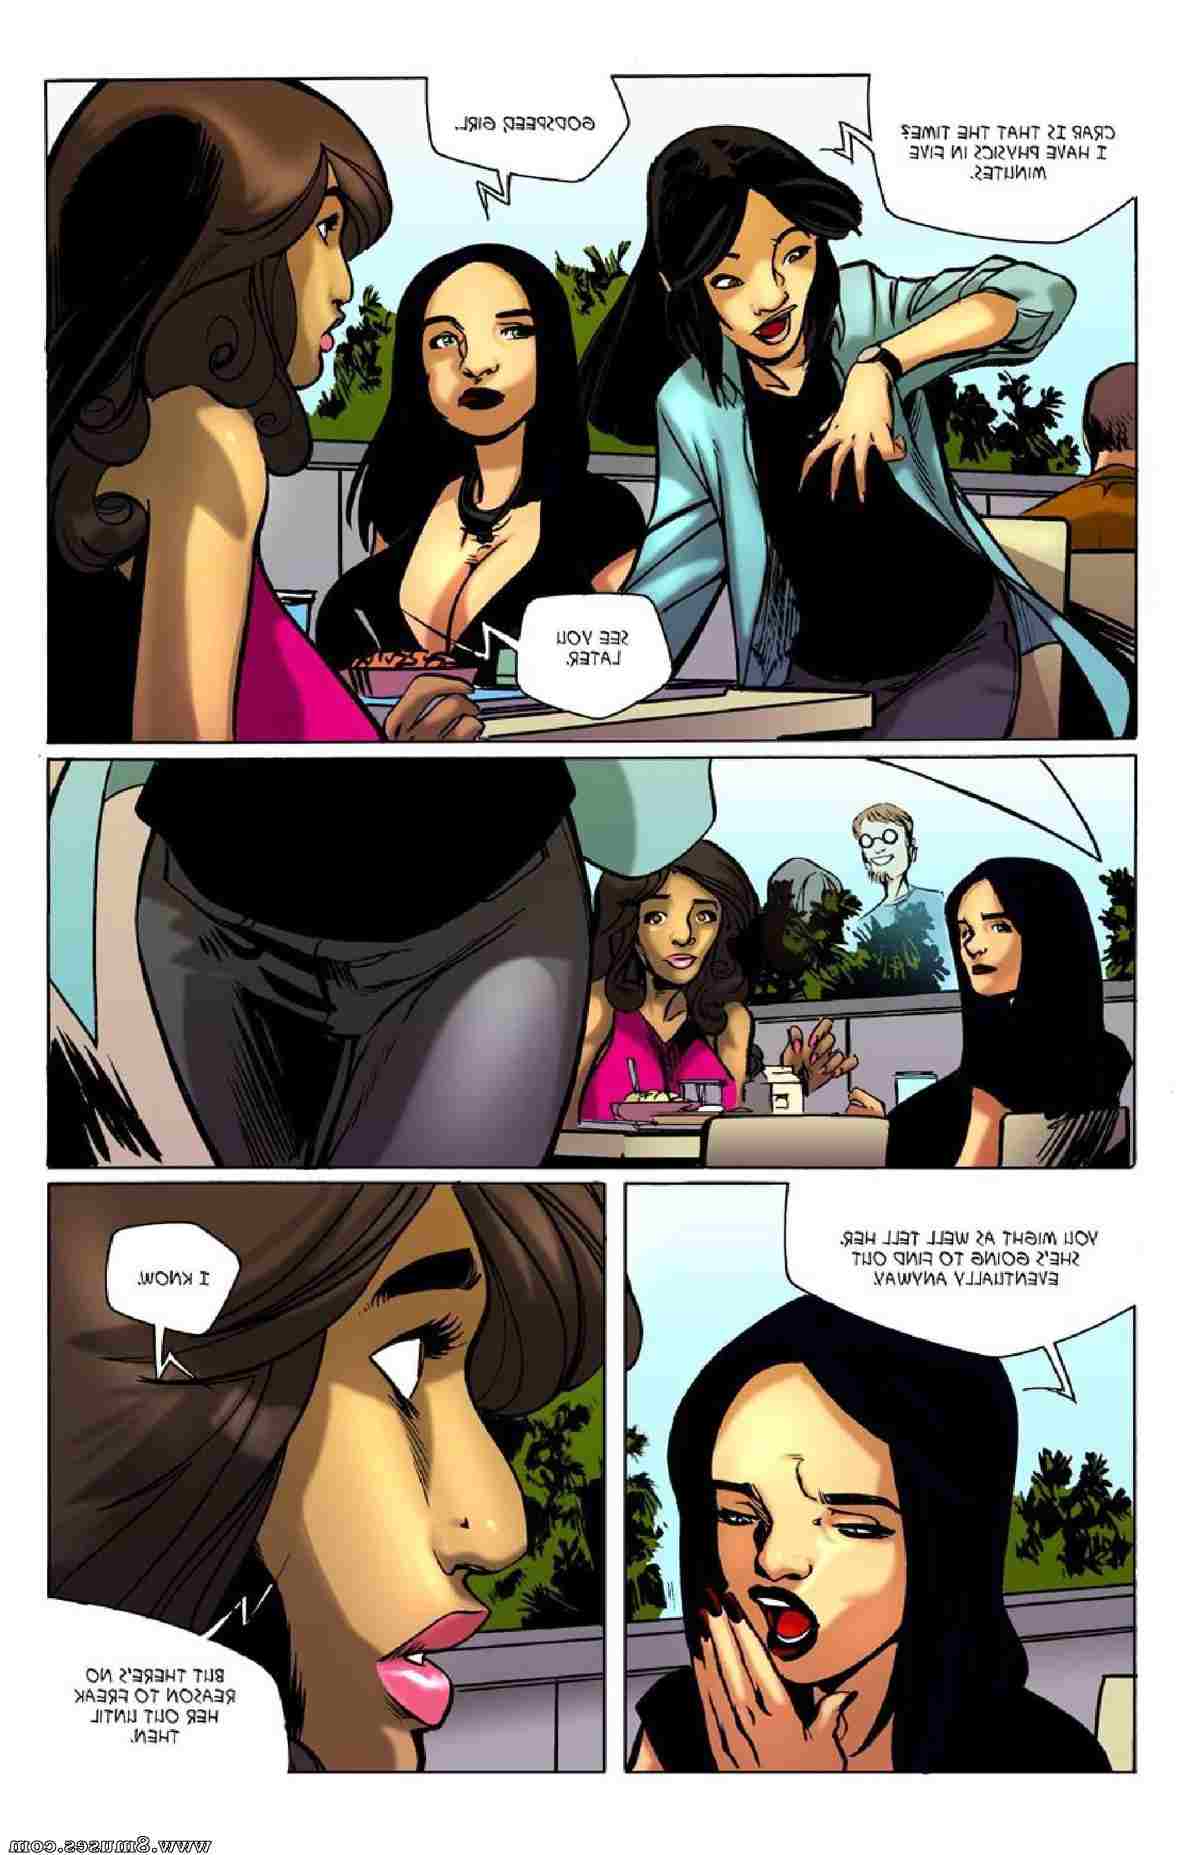 BE-Story-Club-Comics/Welcome-to-Chastity Welcome_to_Chastity__8muses_-_Sex_and_Porn_Comics_19.jpg